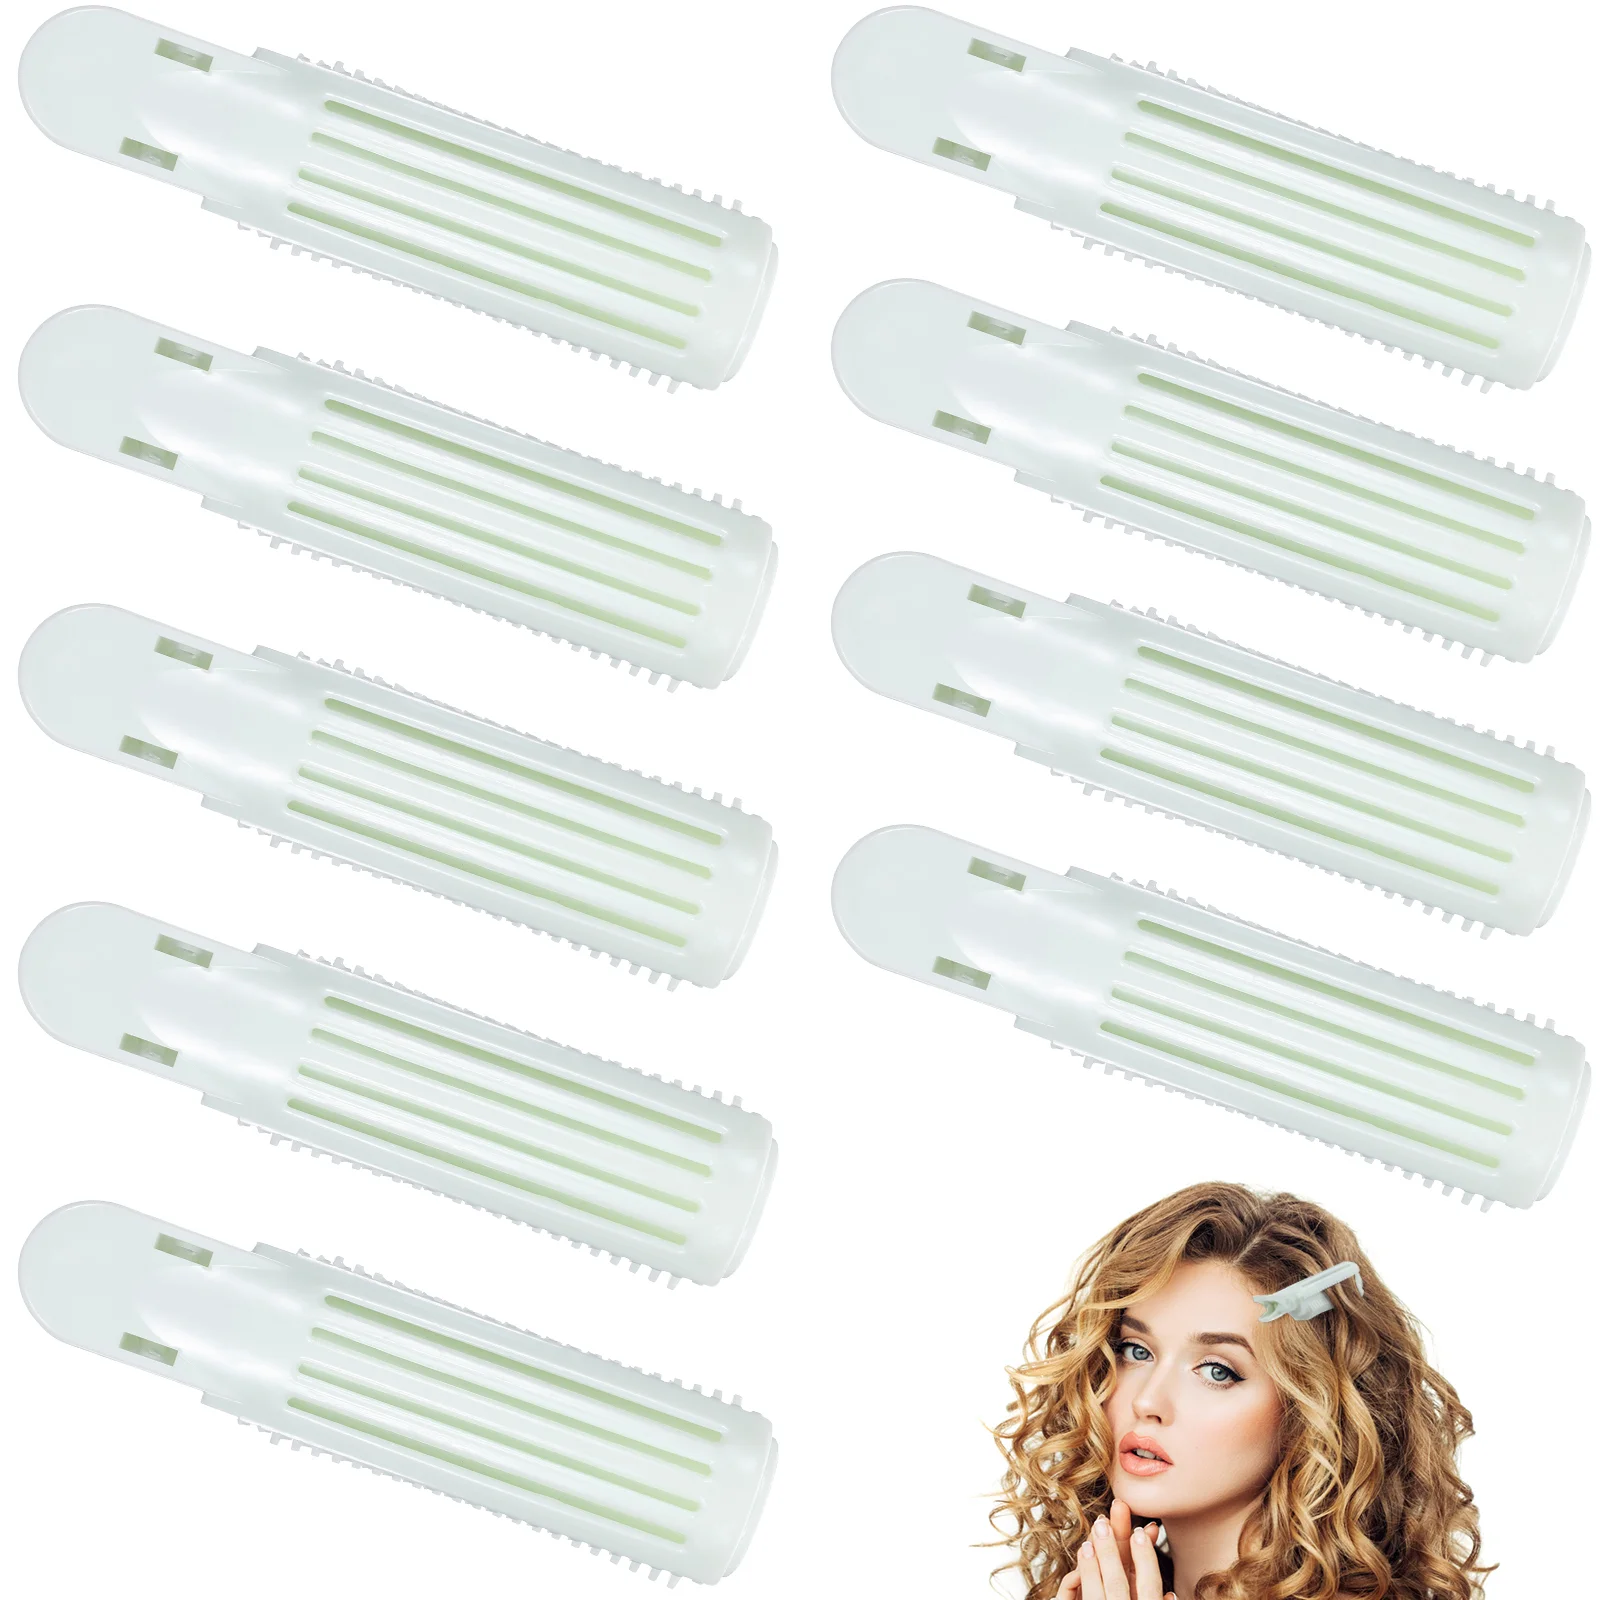 10 Pcs Curlers Bangs Clips Root for Curly Hair Volume Rollers Barrettes Volumizing Adjustable hair rollers curlers bangs hair volume hair curling tube styling tools women diy useful styling fluffer hair clips